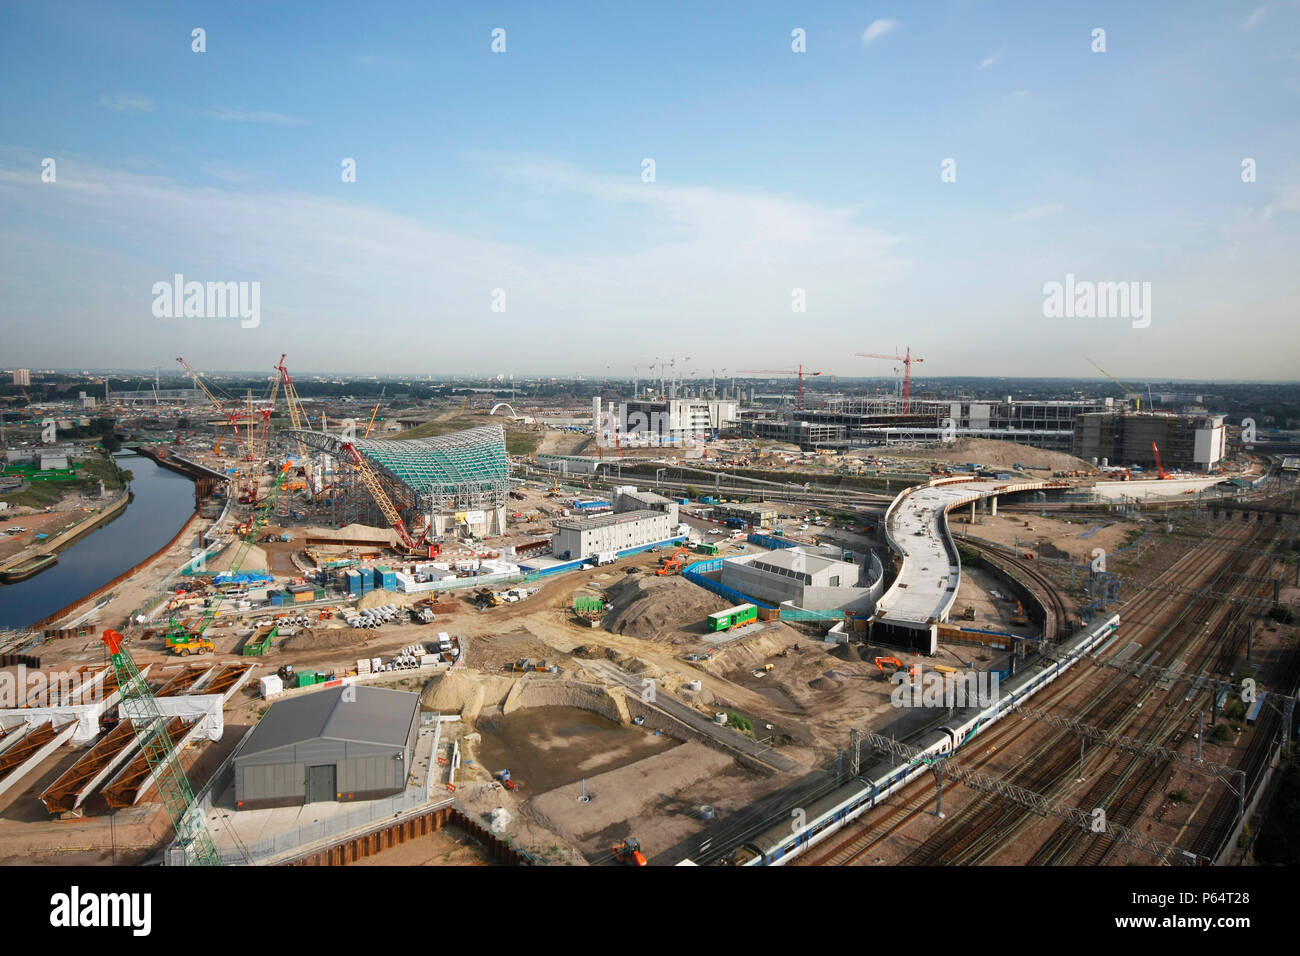 Olympic Aquatics Centre under construction, Stratford, London, UK, August 2009, looking North-West Stock Photo